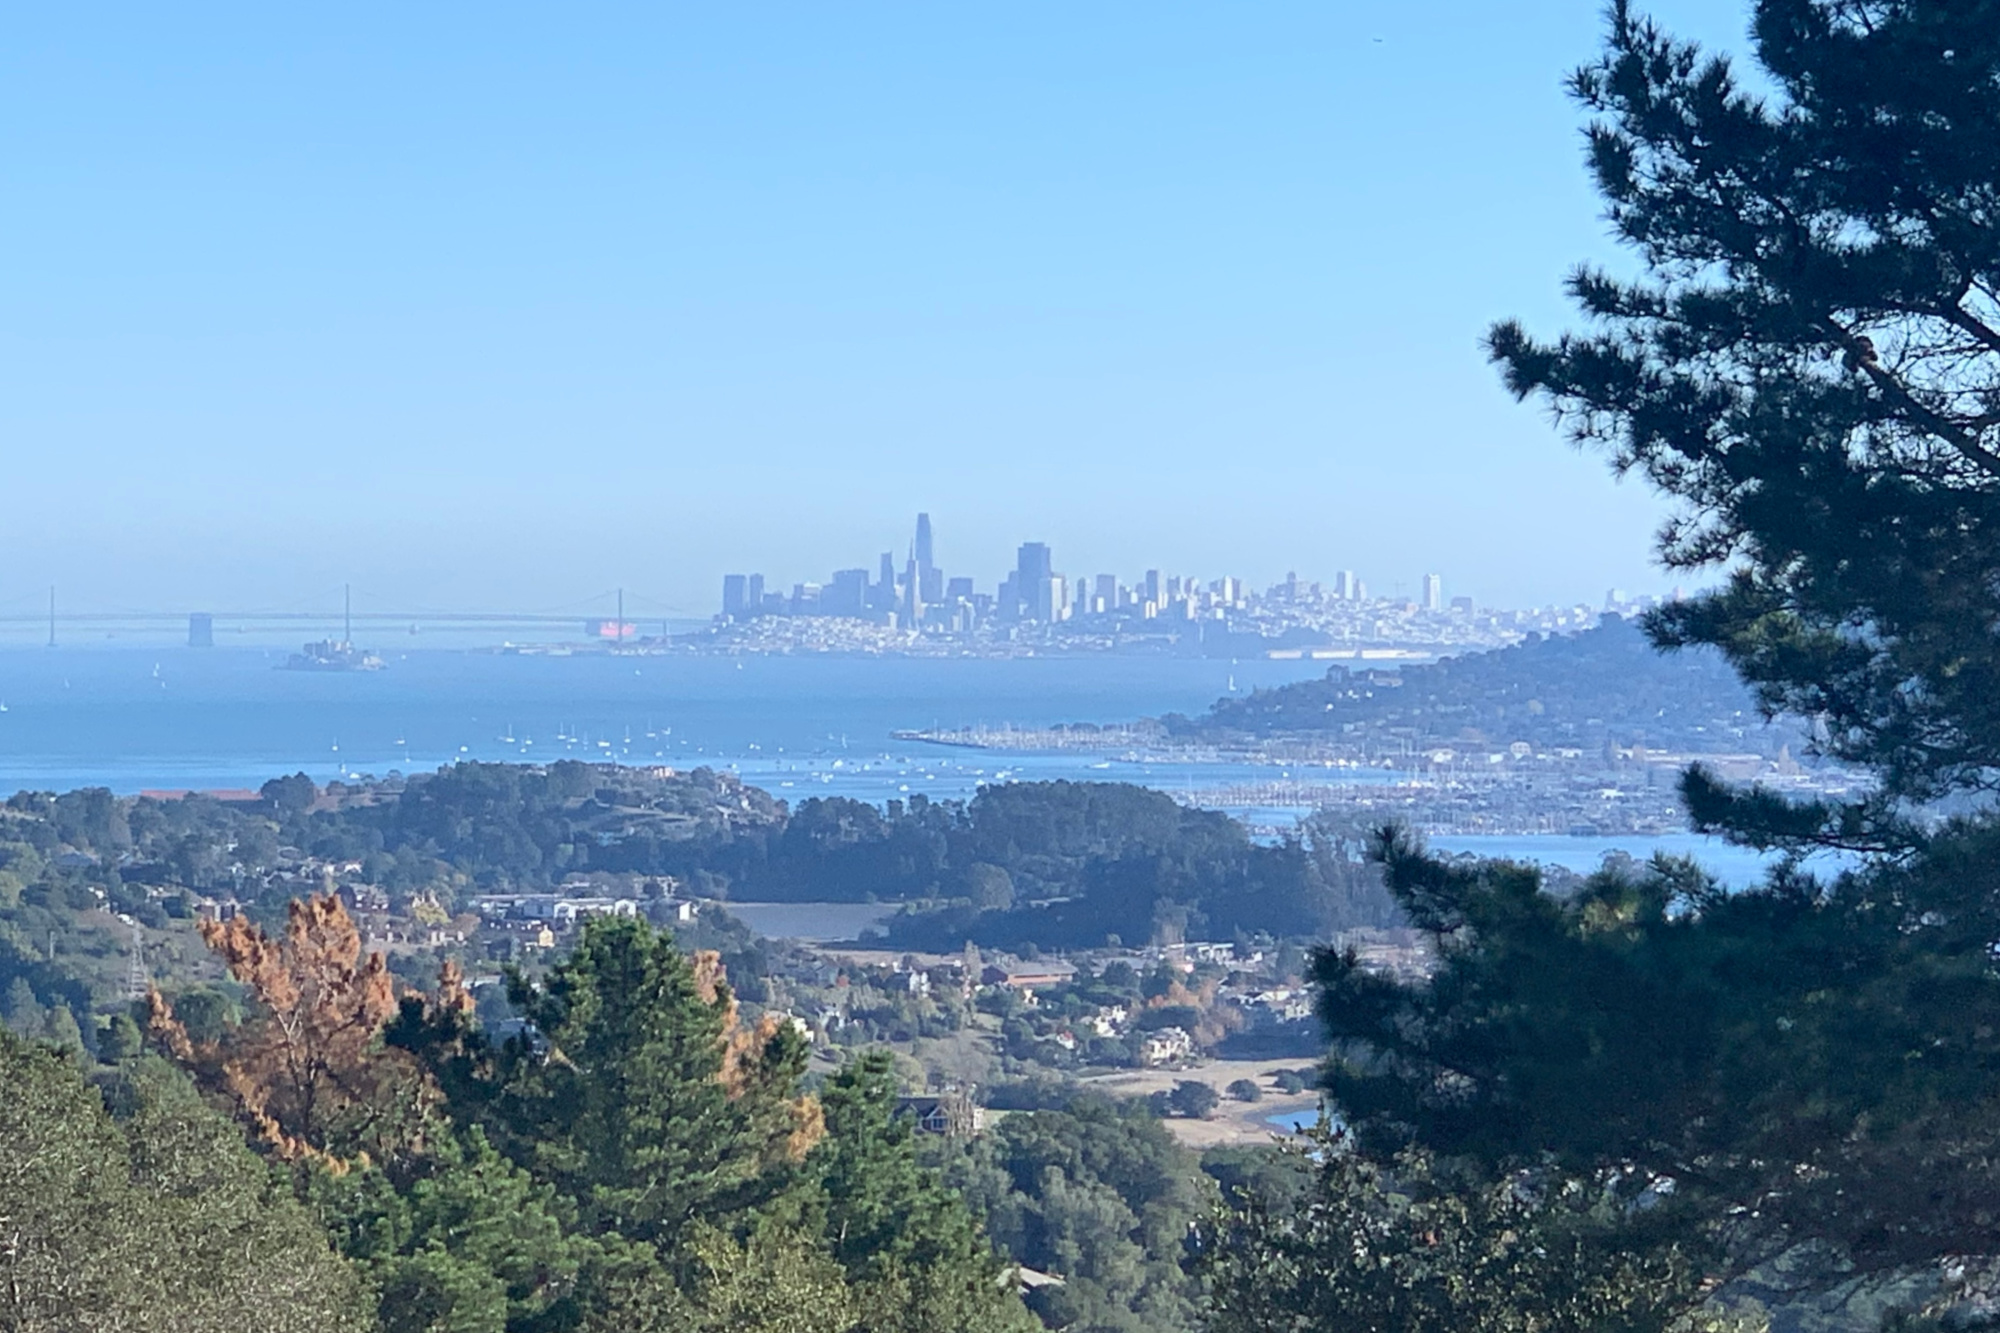 A view from green hills shows the San Francisco city skyline in the distance.